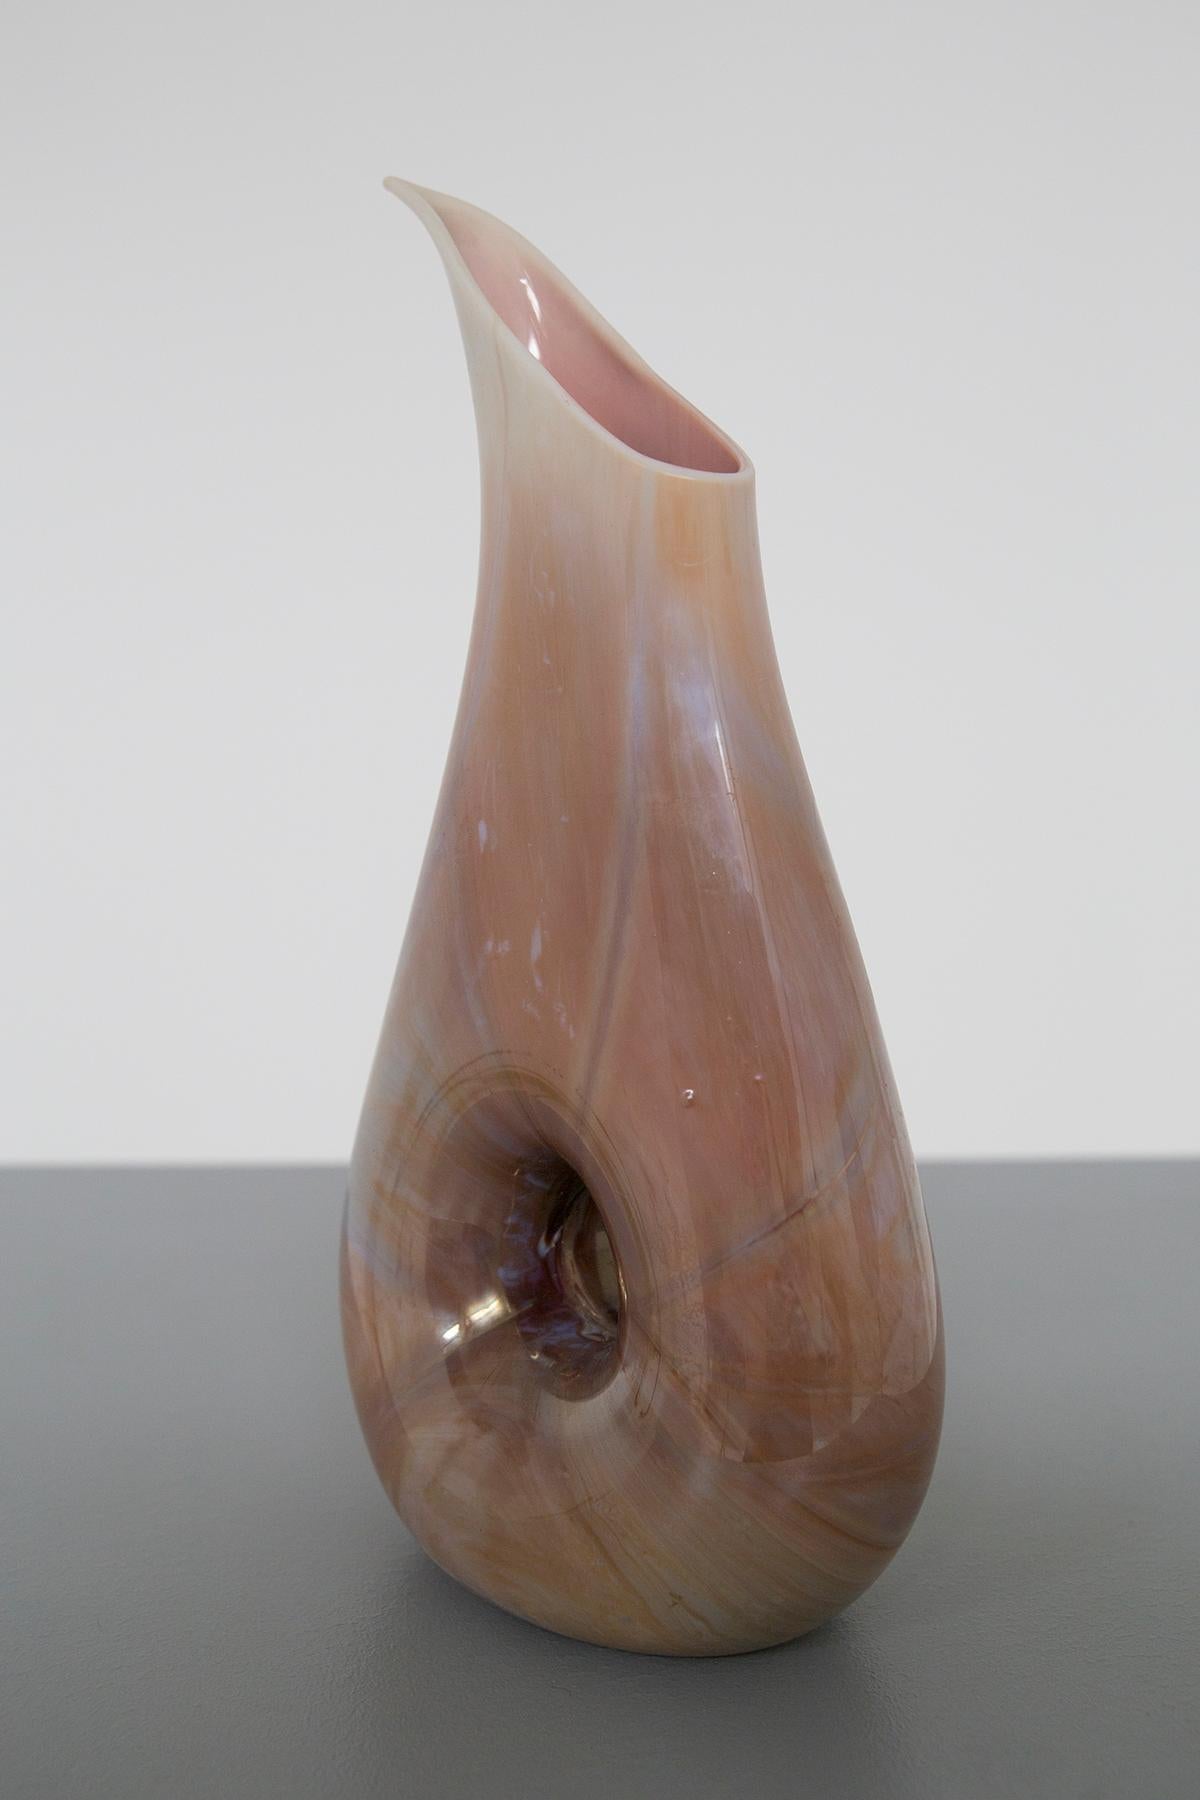 Mid-Century Modern Italian Vase Chalcedony by Aureliano Toso Attributed to Dino Martens, 1950s For Sale